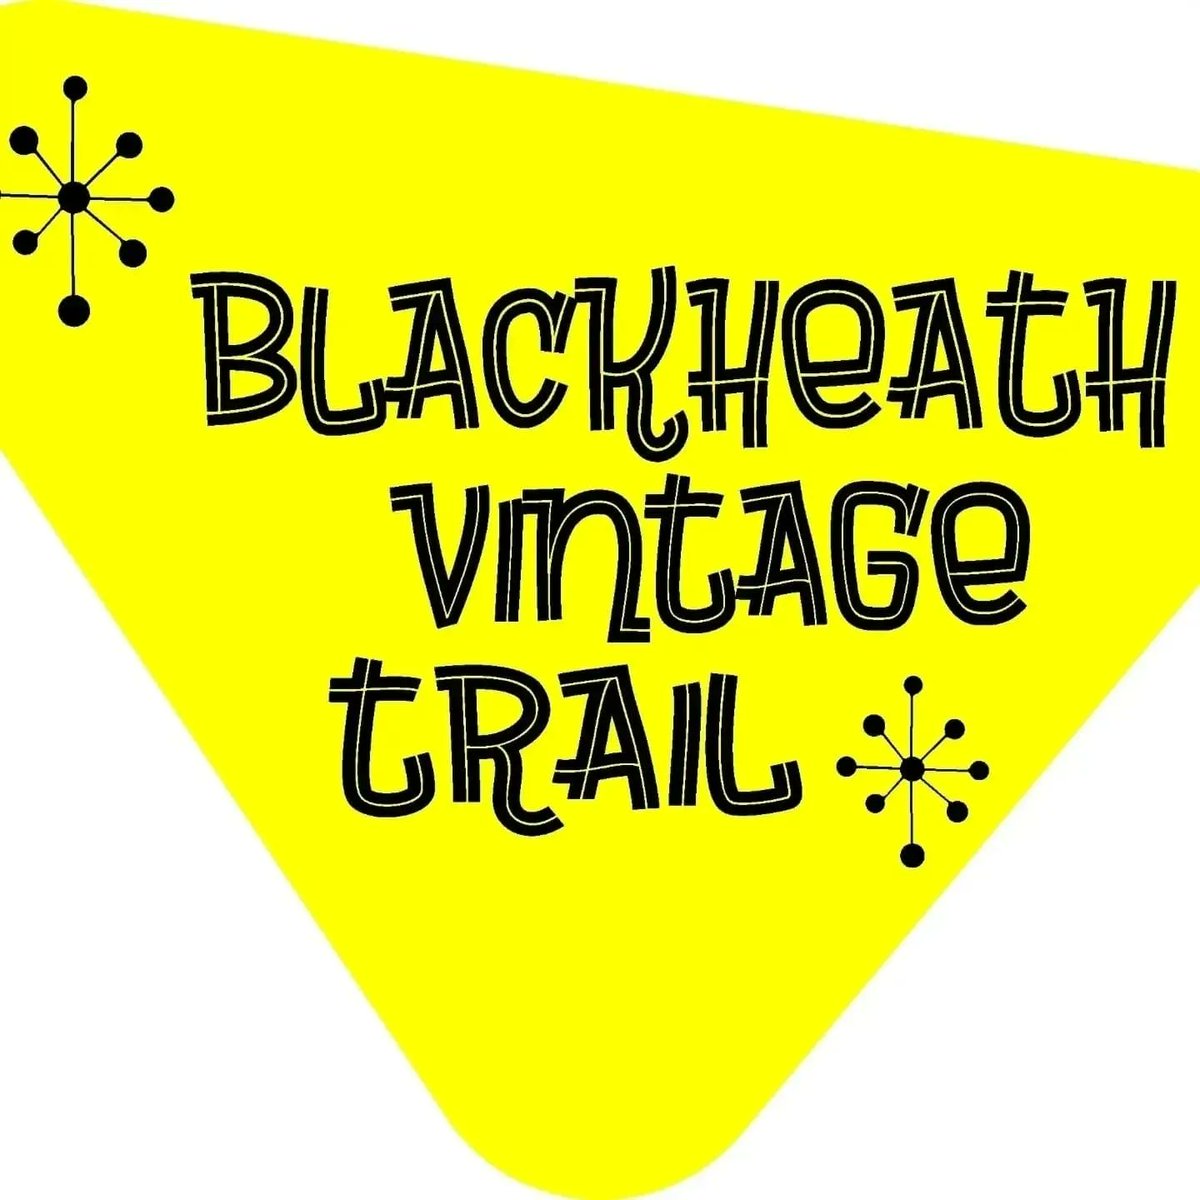 Pop in to Blackheath village this weekend. Spot the stores offering Vintage goodies. Come to Royal Standard Pub for 49s 40s DJ. Shop again on Sunday, Inc the Food Market. Enjoy the MOT ClassicCars, 3:30 pm outside The Everest Inn, Montpeliers, Ivy, Snack Heath. @blackheath_v